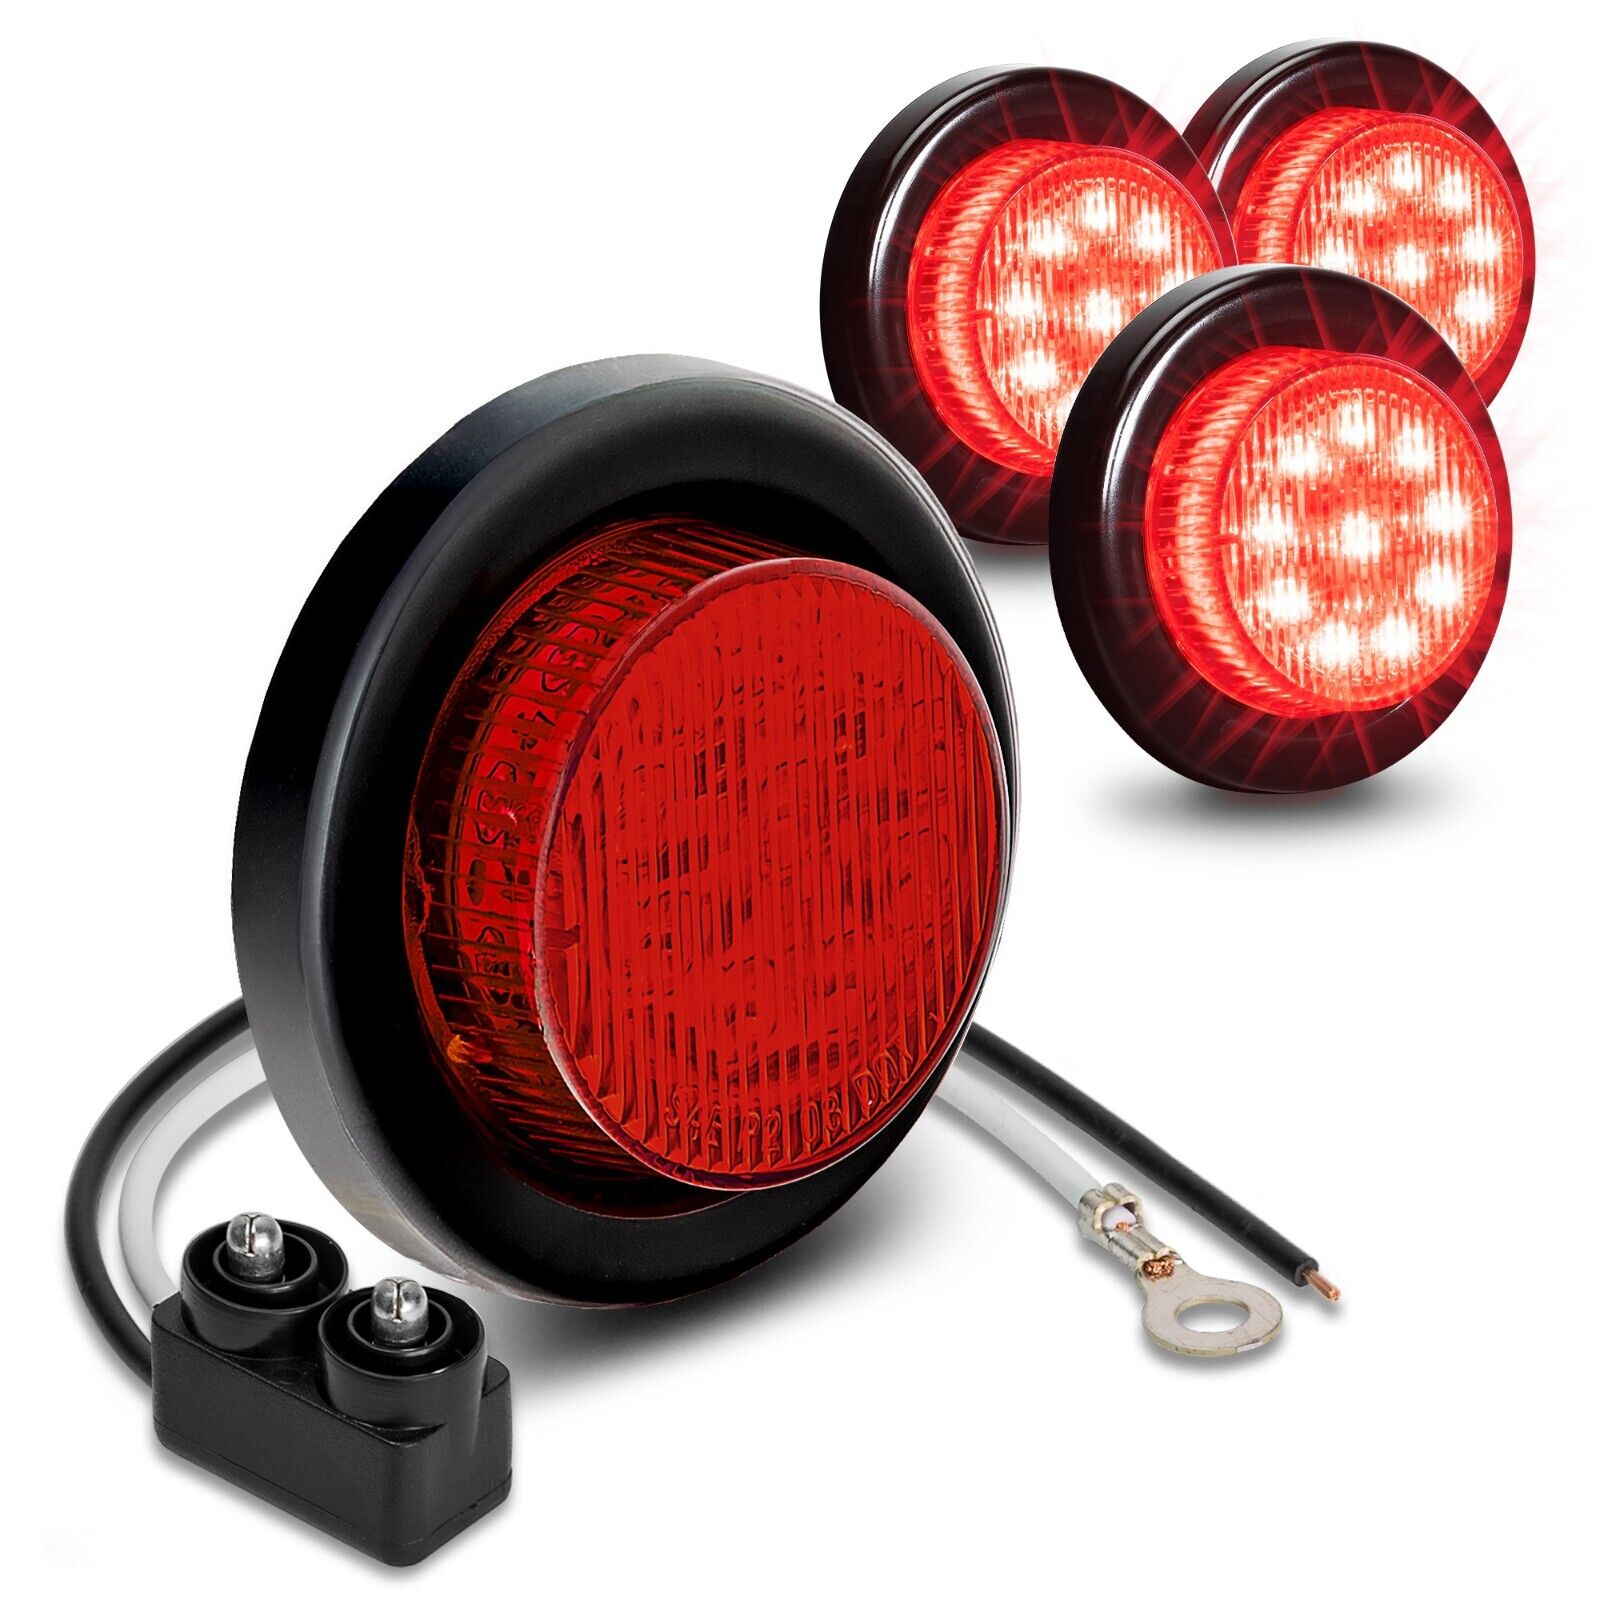 4pc 2 Inch DOT Round Red LED Trailer Sider Marker Lights with Grommet for Truck